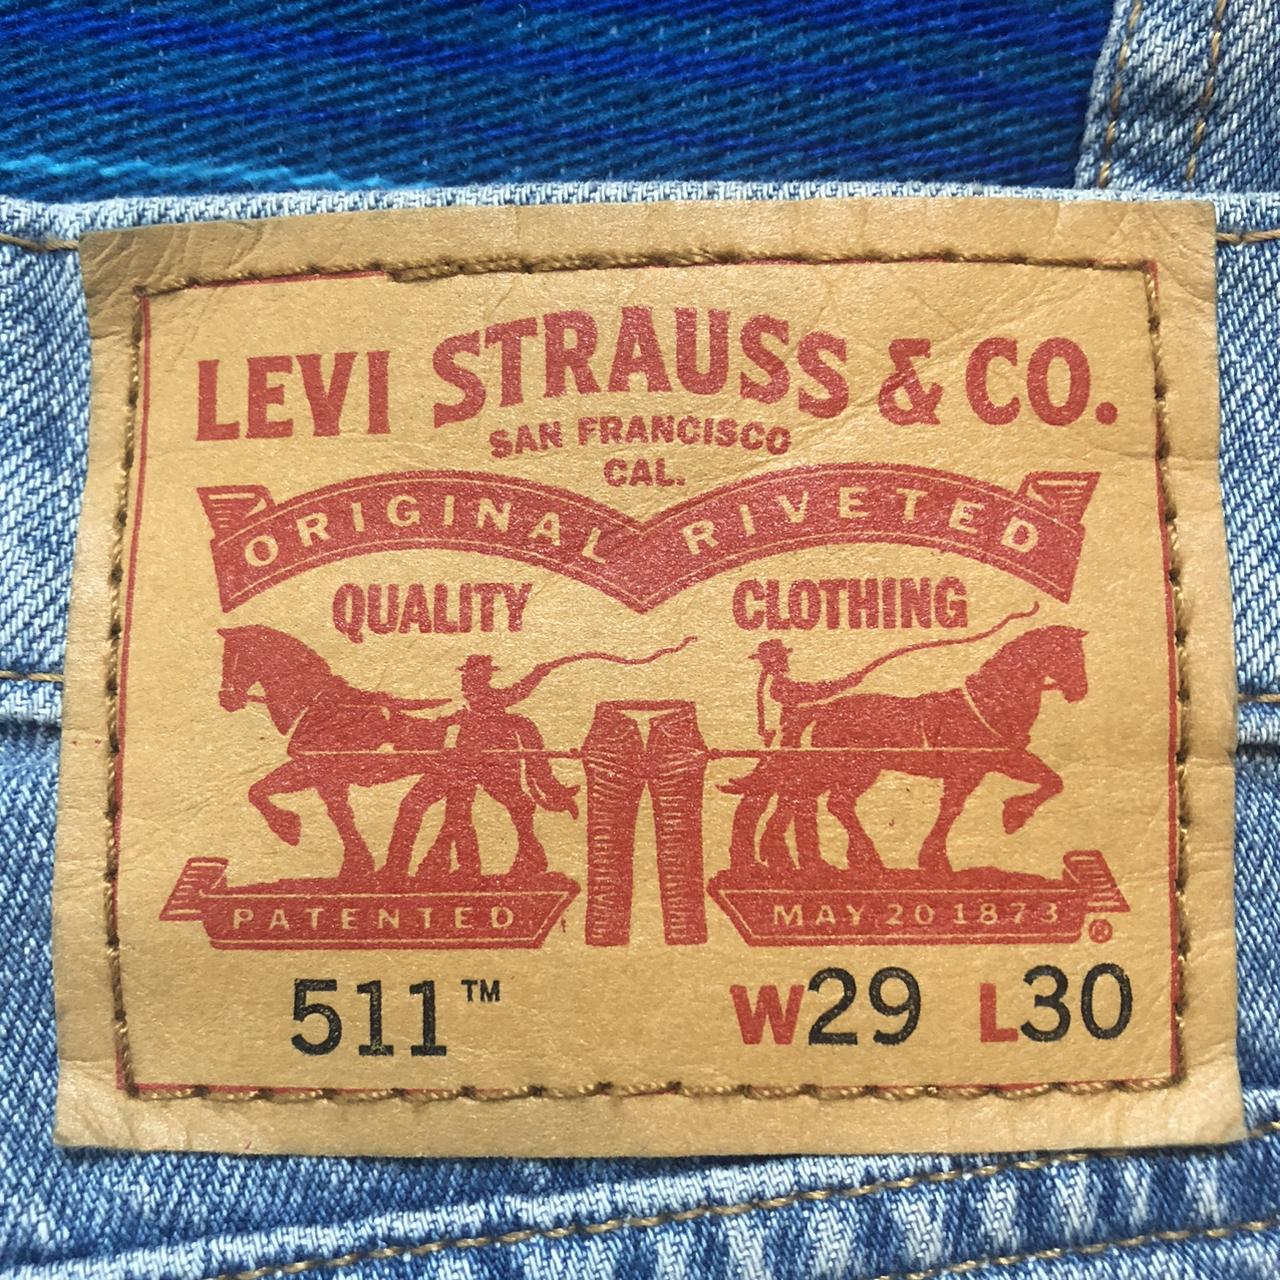 💎Levi’s 511 light washed ripped jeans💎these came... - Depop